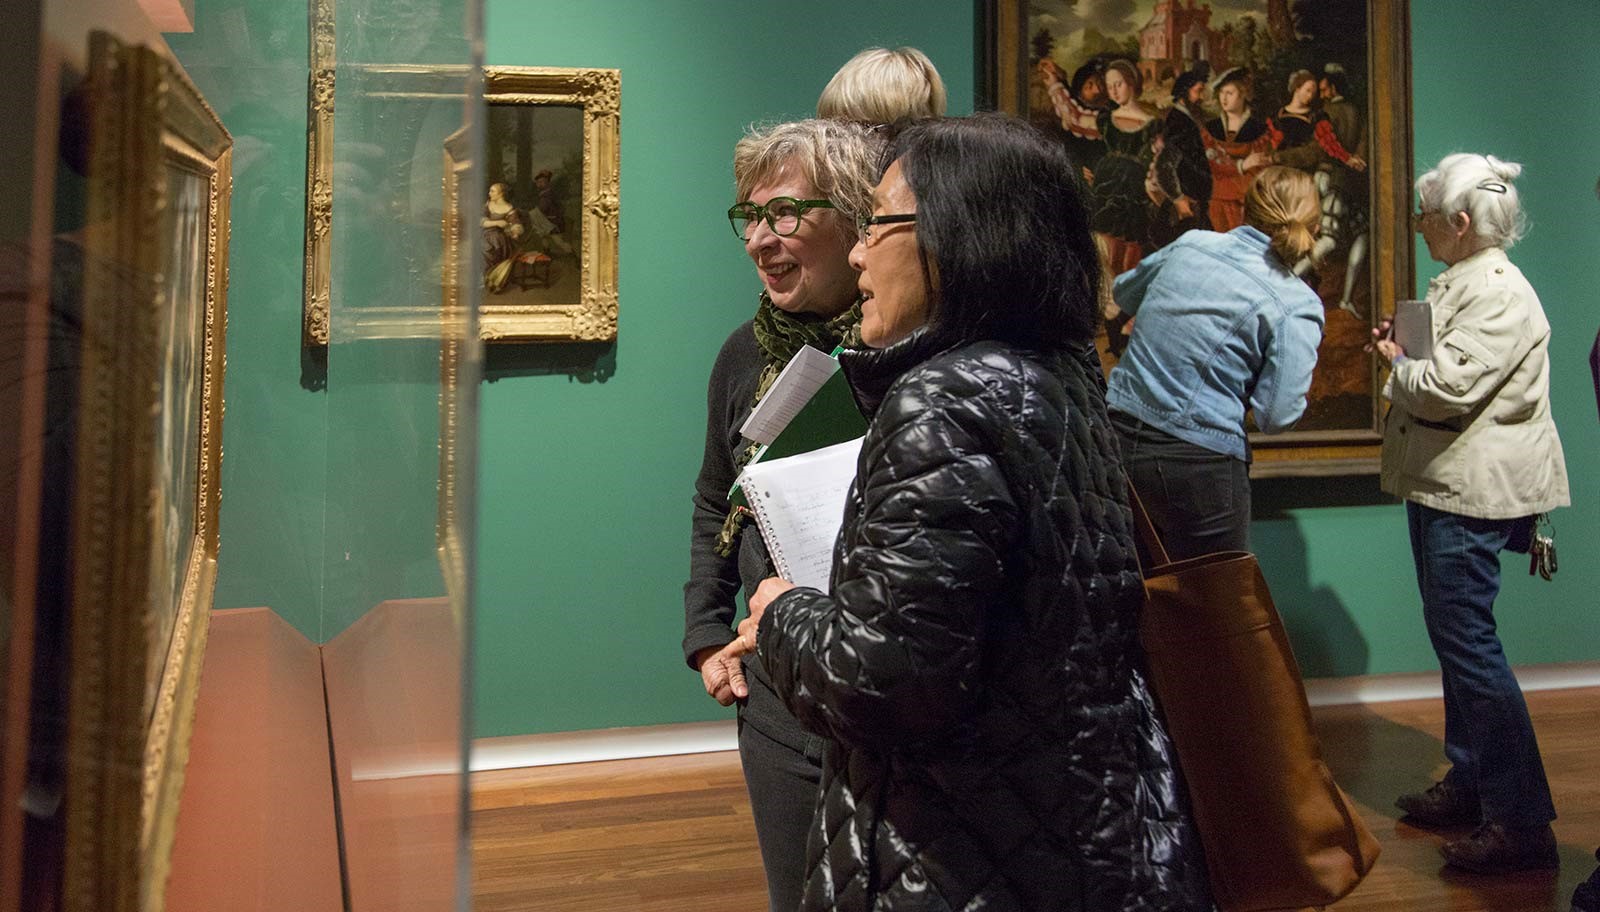 Two women look and discuss at a painting under a vitrine in the UMFA European gallery